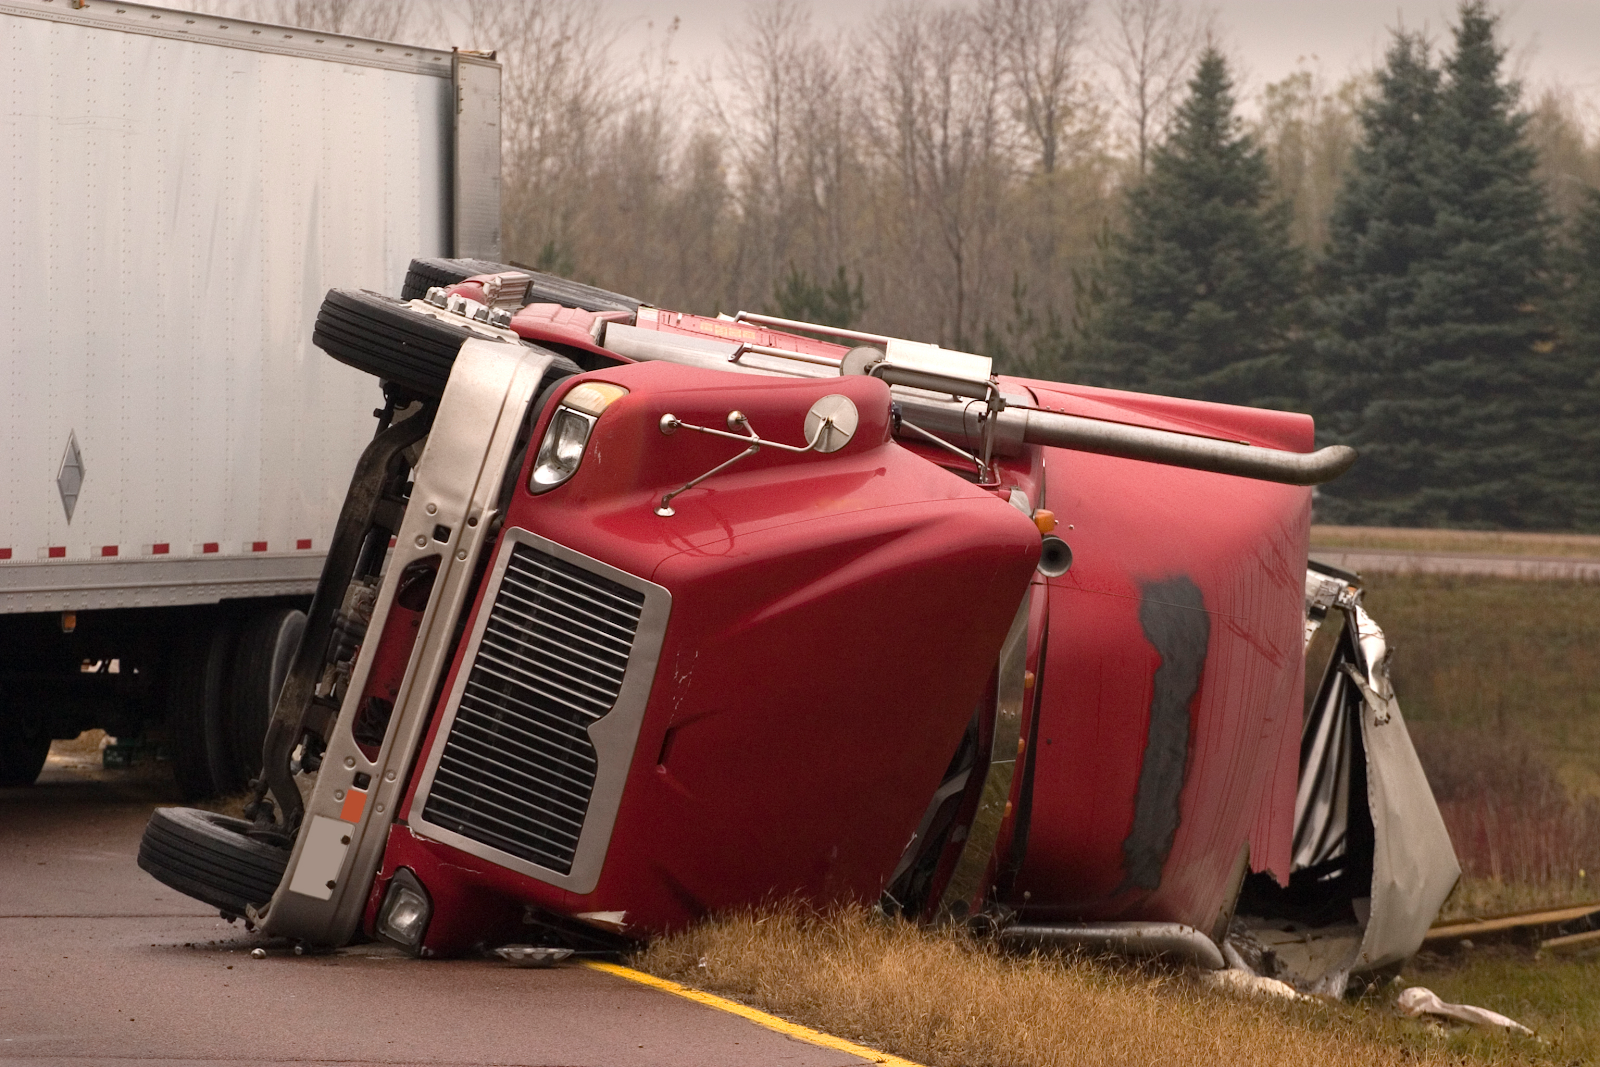 red semi truck front flipped over on the road, accident involving multiple truck drivers